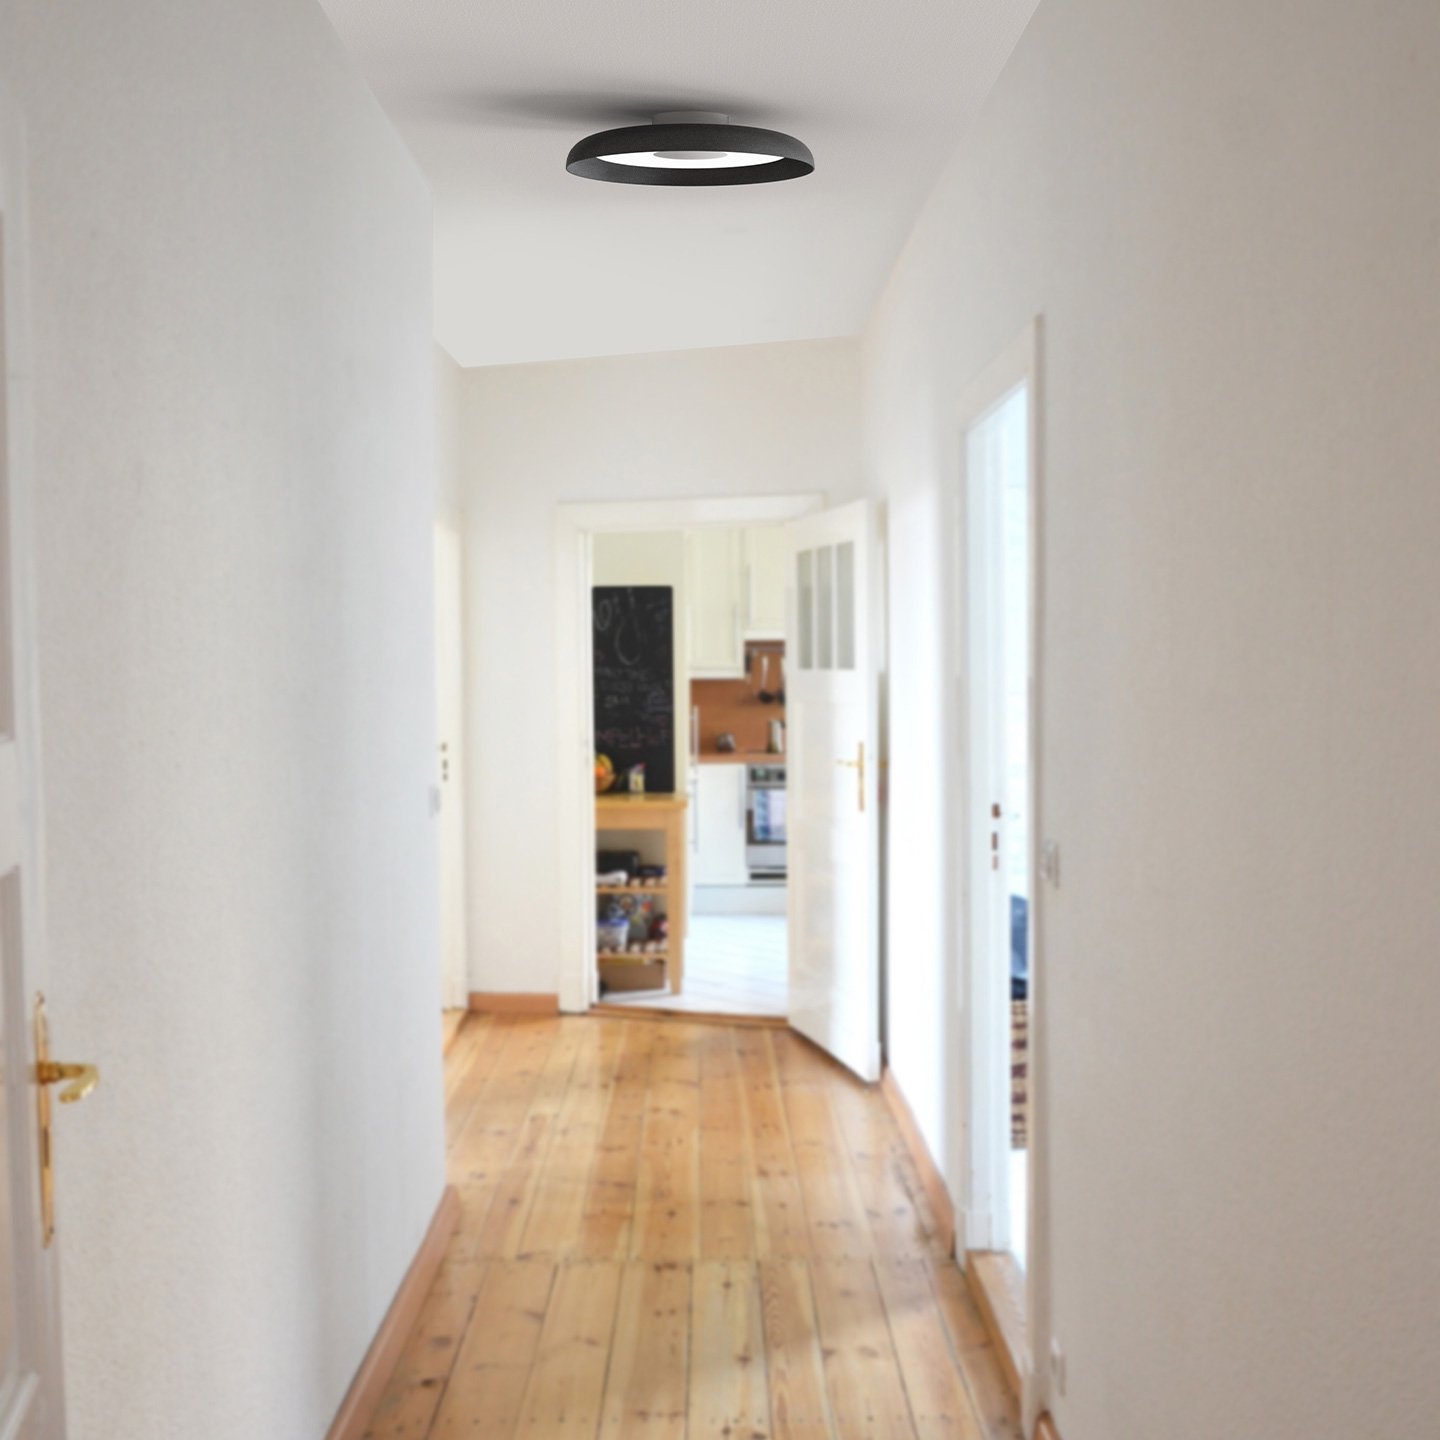 Nivél is a LED light engine providing seamless control for any space.